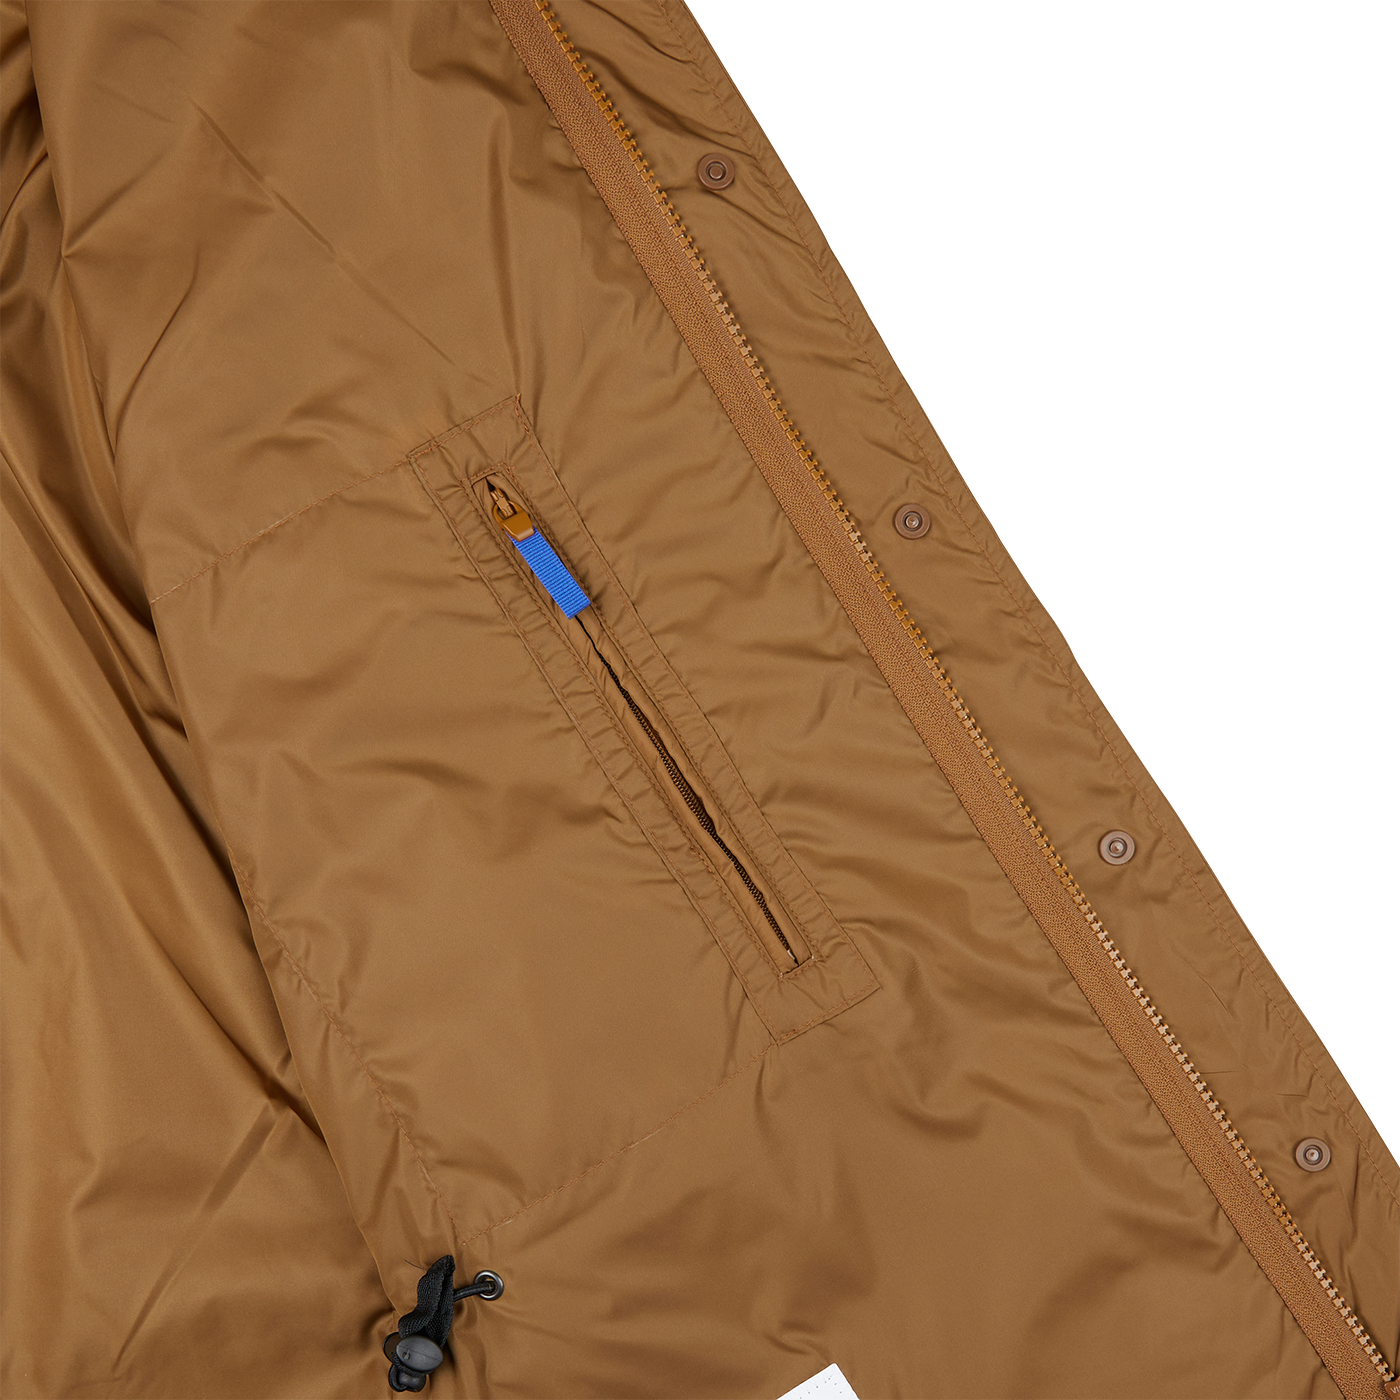 Tan Amber Brown Recycled Nylon Field Jacket with blue zippers by Aspesi